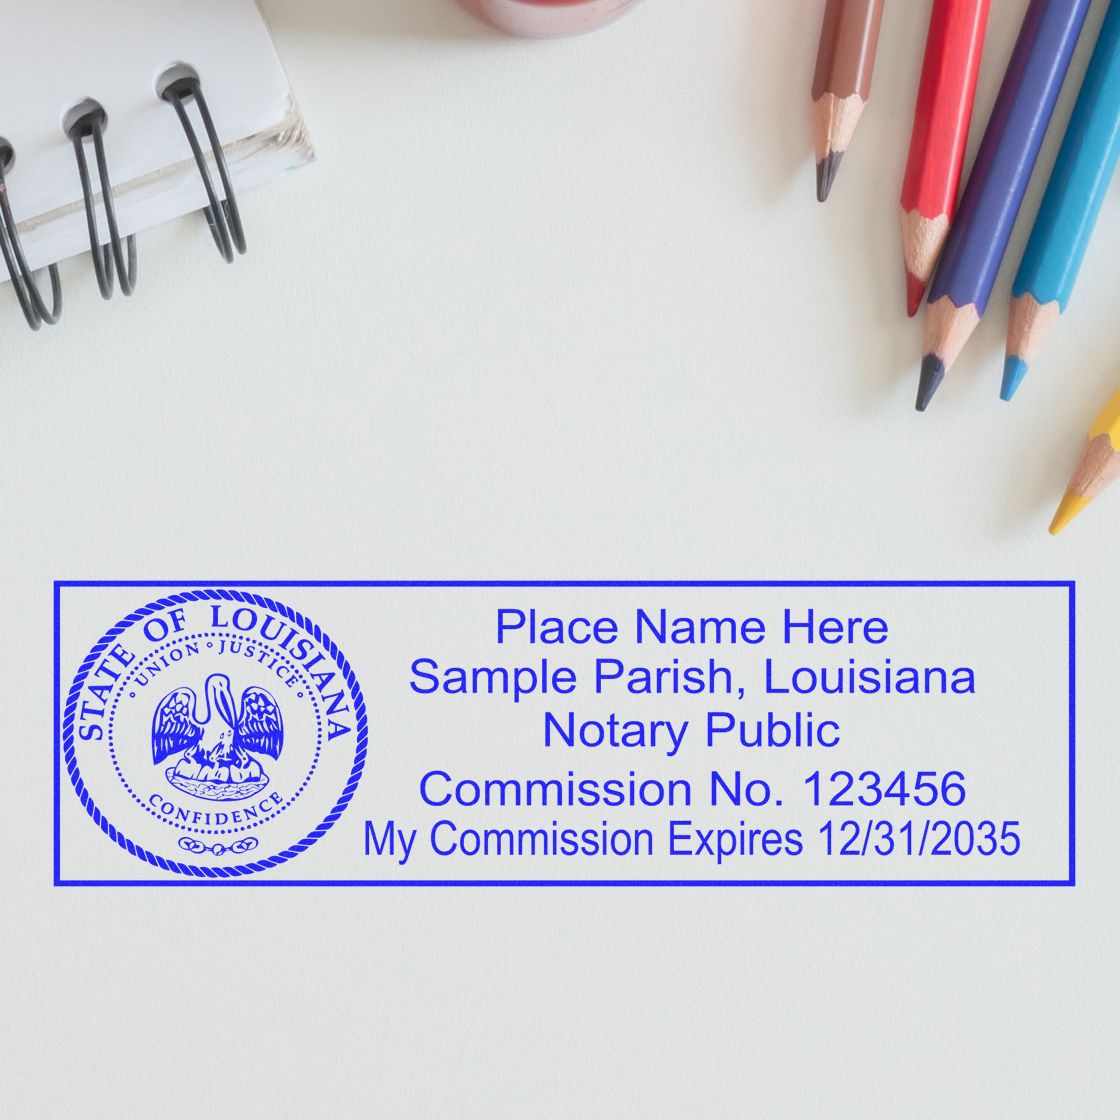 This paper is stamped with a sample imprint of the Wooden Handle Louisiana State Seal Notary Public Stamp, signifying its quality and reliability.